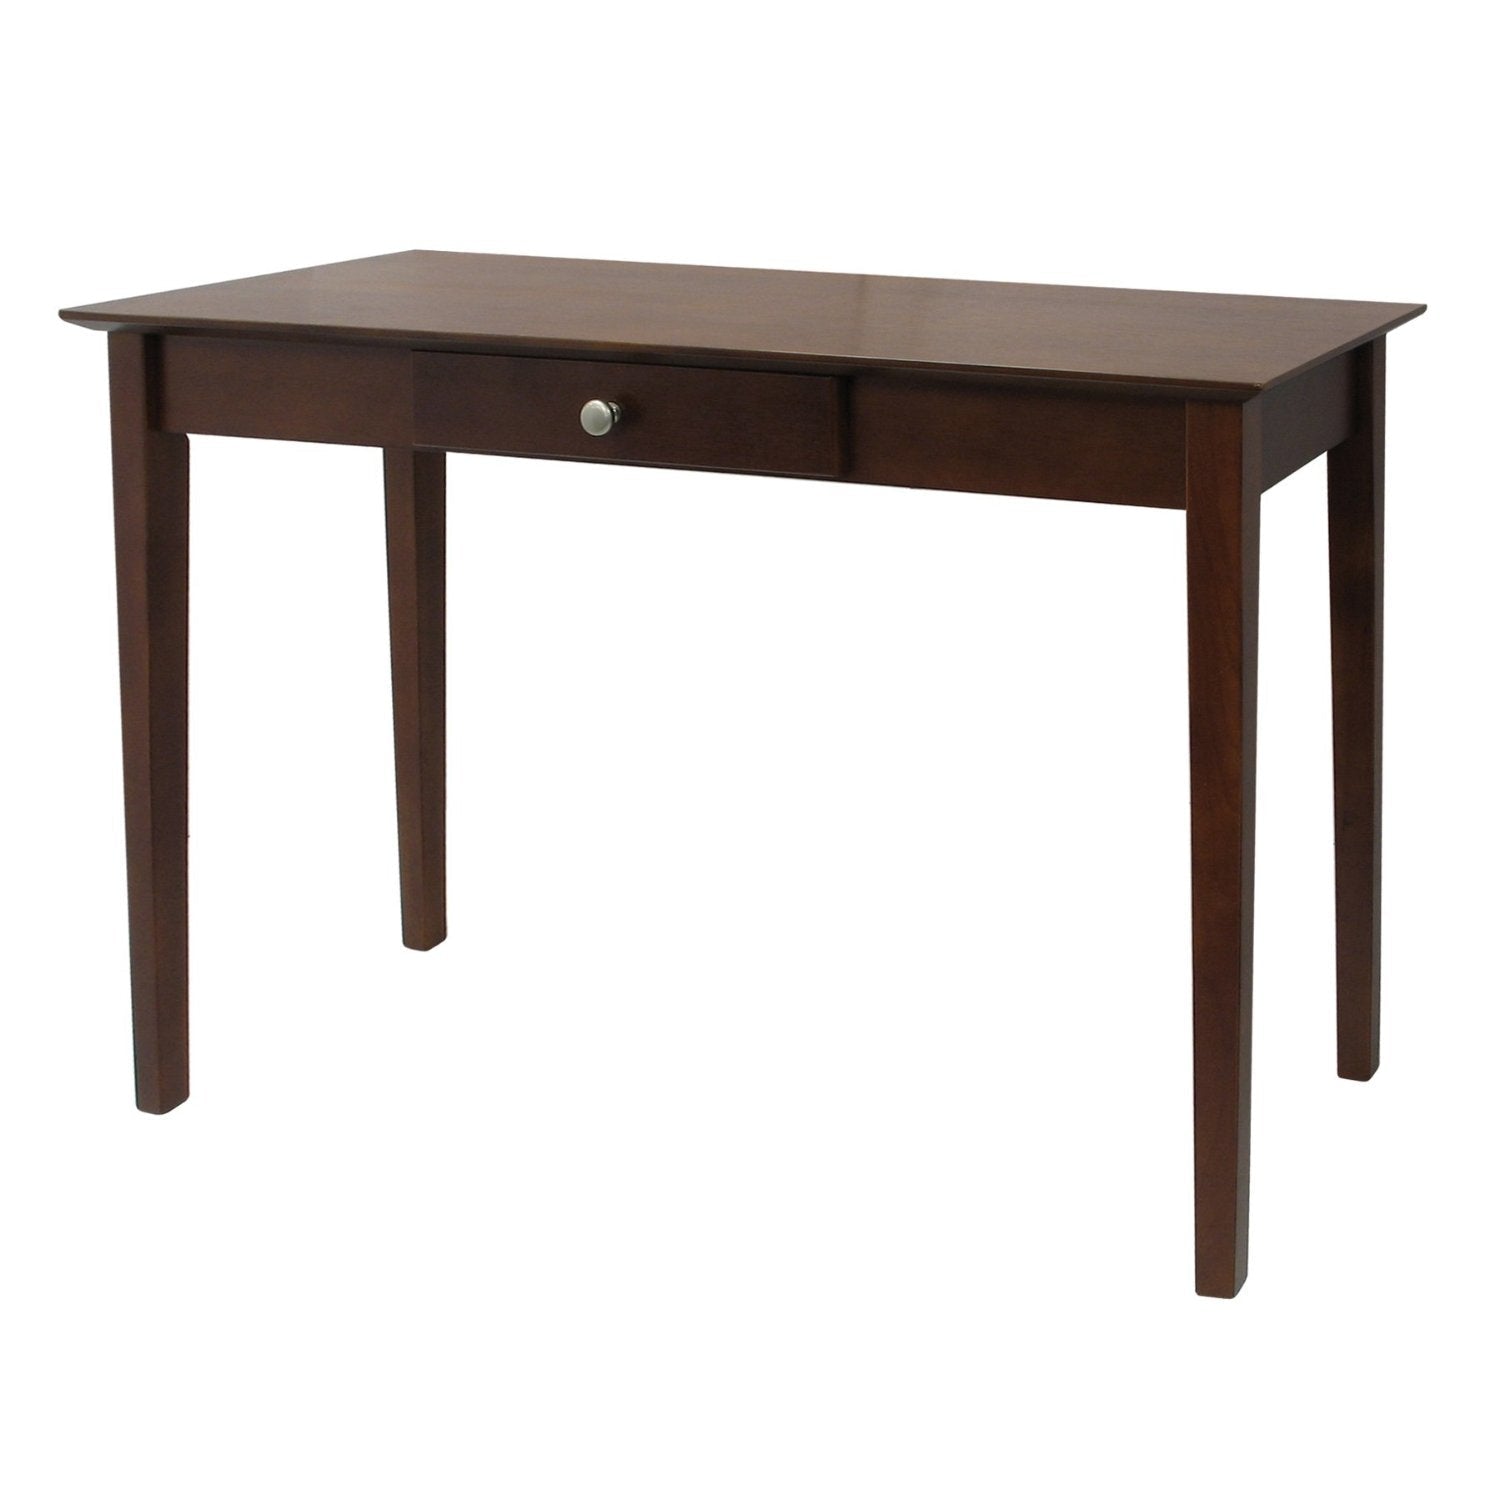 Living Room > Console & Sofa Tables - Console Table Laptop Computer Desk Sofa Table In Walnut Finish